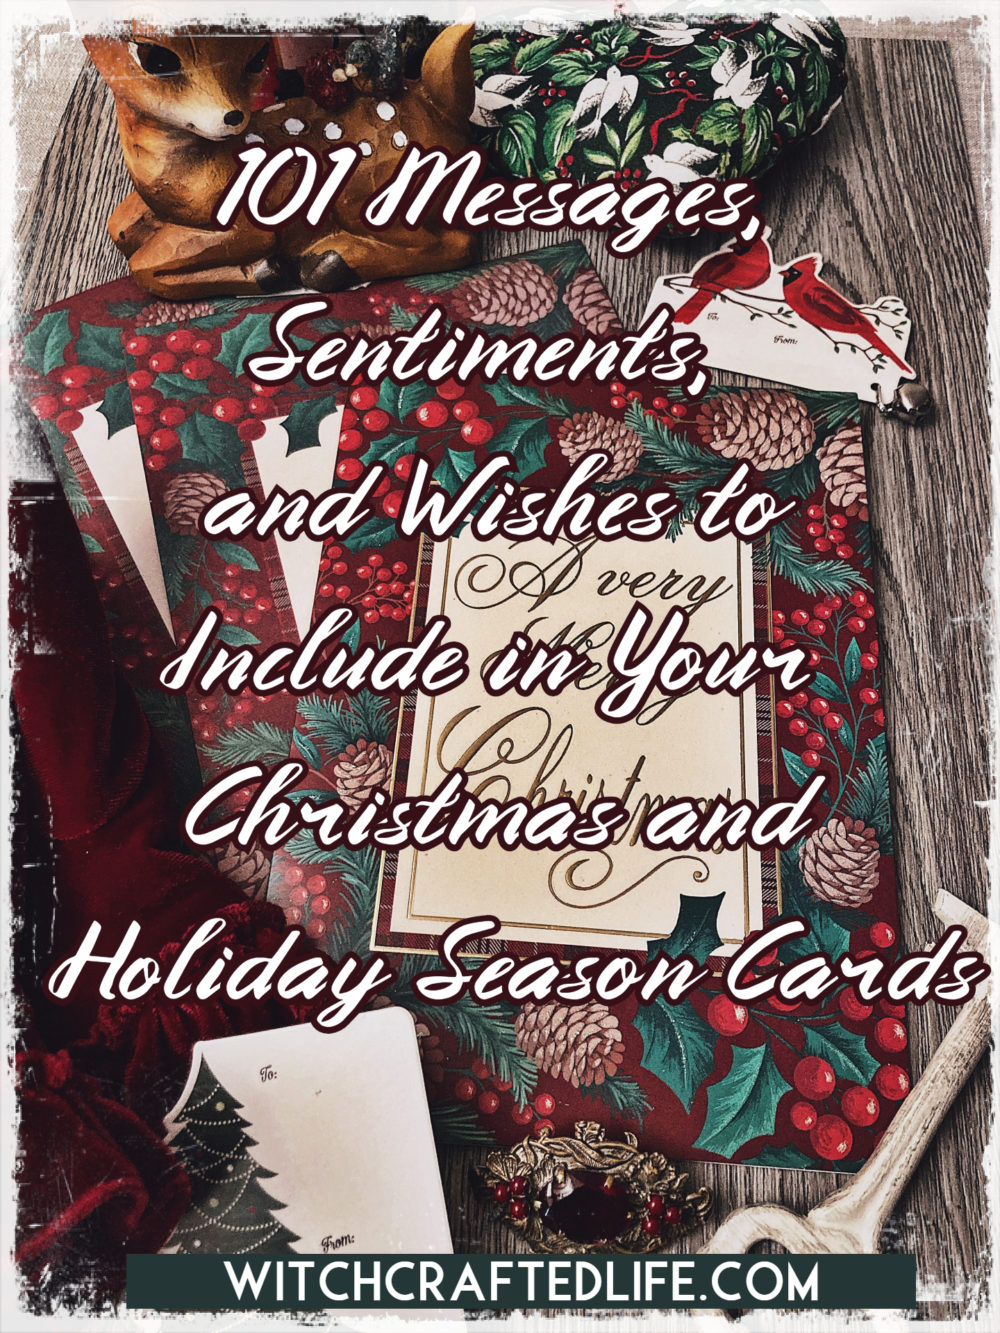 101 messages and sentiments to write in Christmas and holiday cards